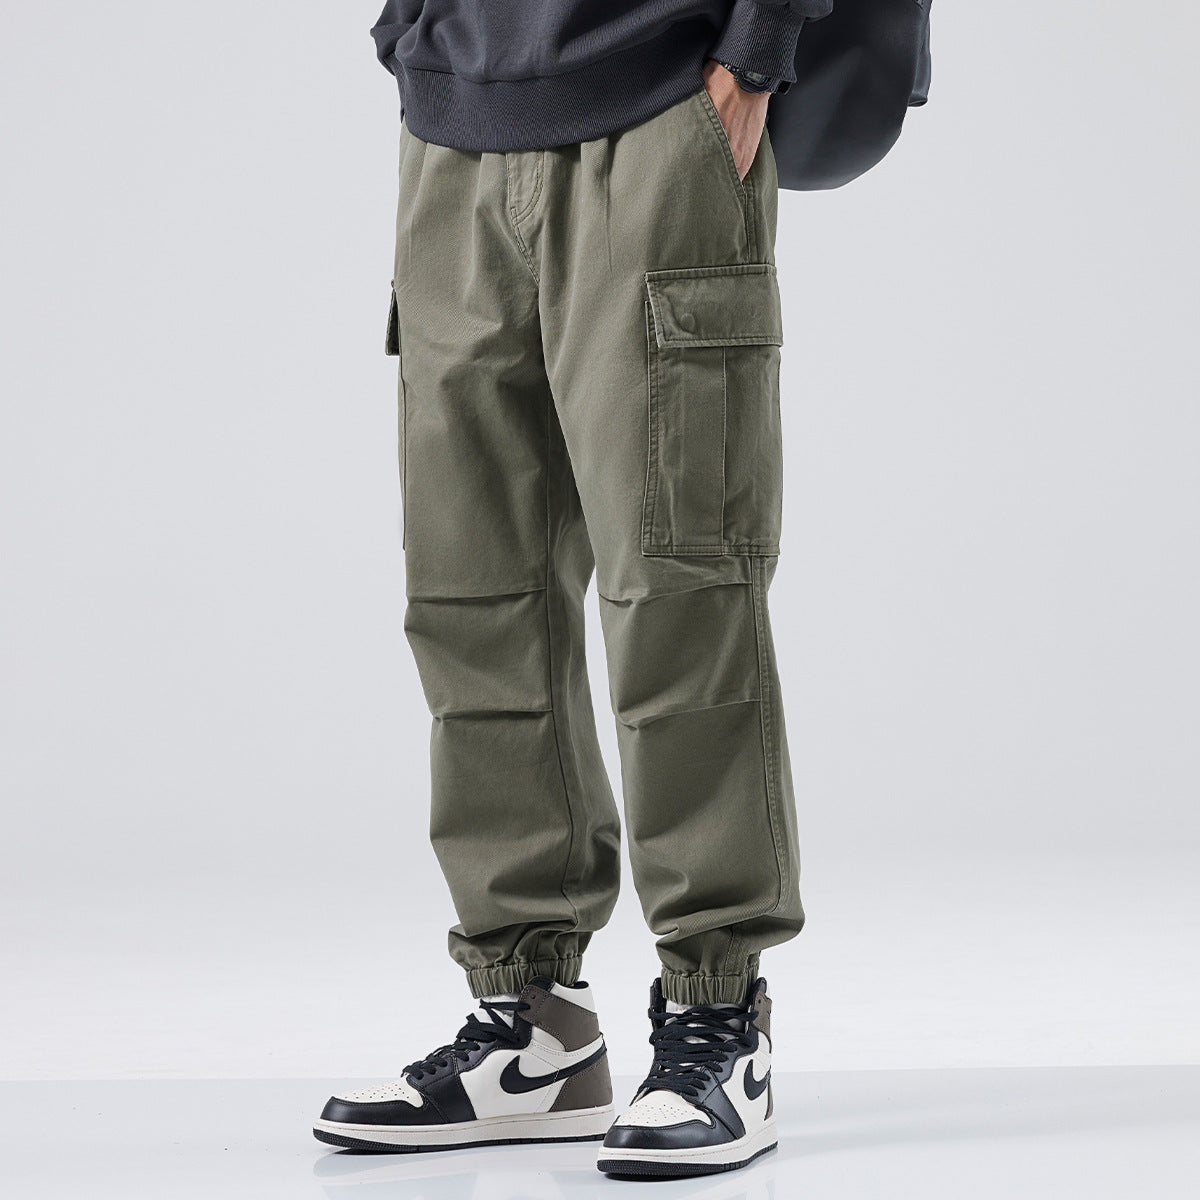 Men's Spring And Autumn Casual Cargo Pants